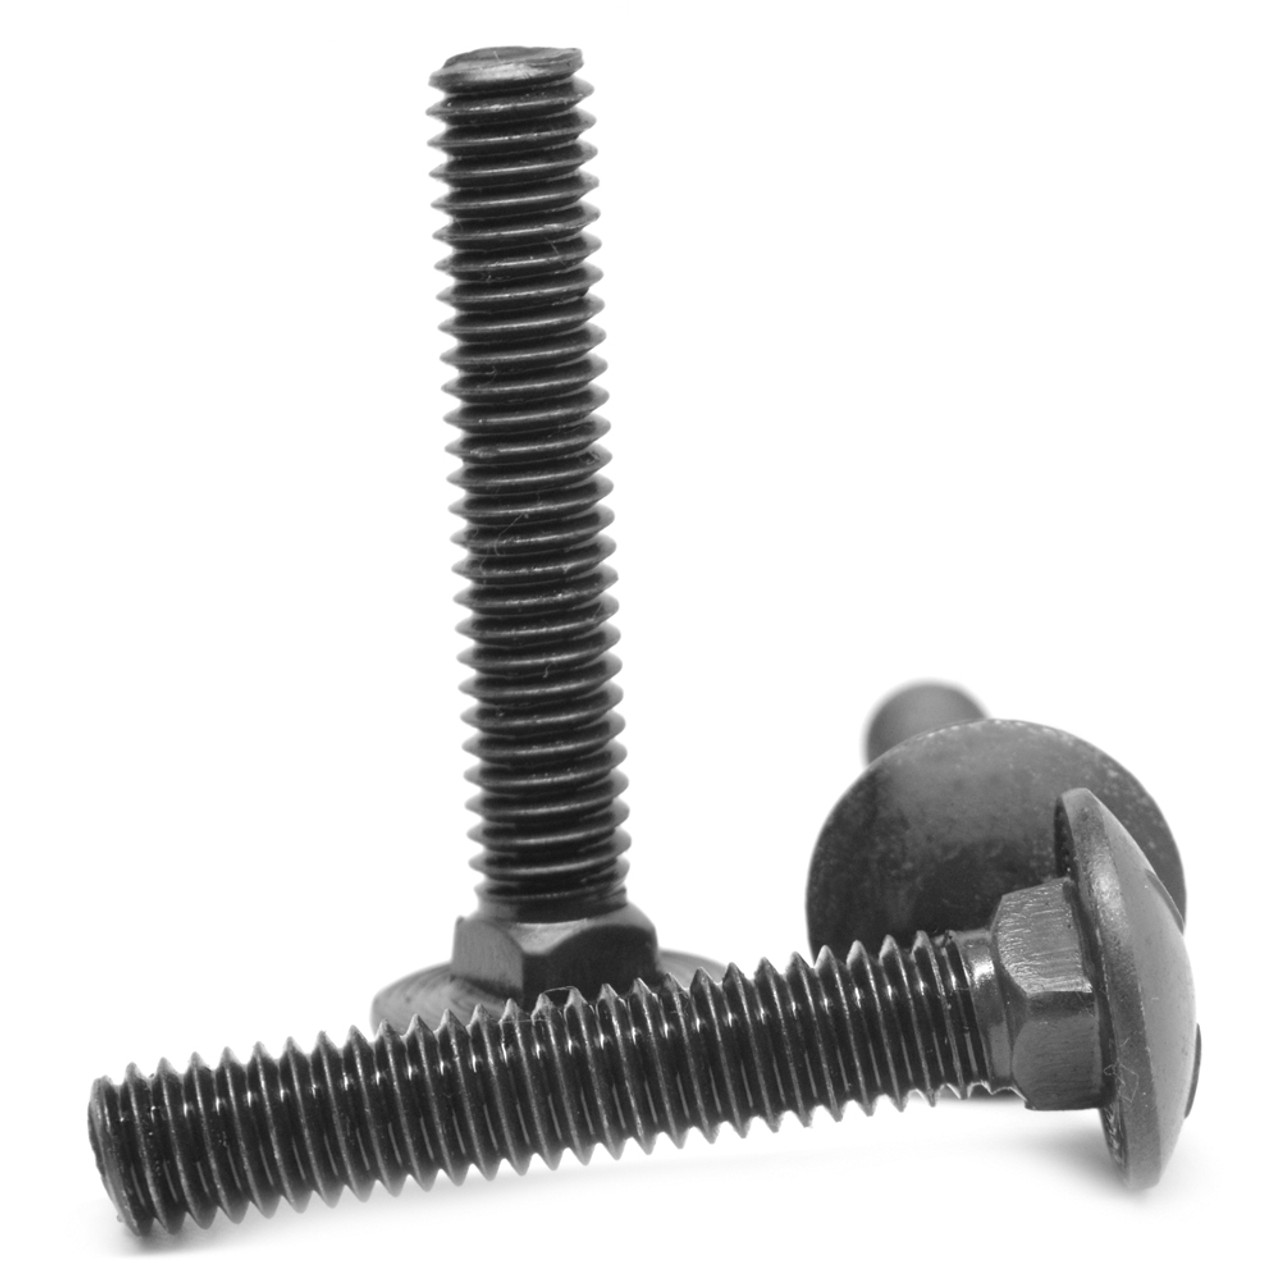 3/4-10 x 3 (FT) Coarse Thread Grade 8 Carriage Bolt Alloy Steel Thermal Black Oxide